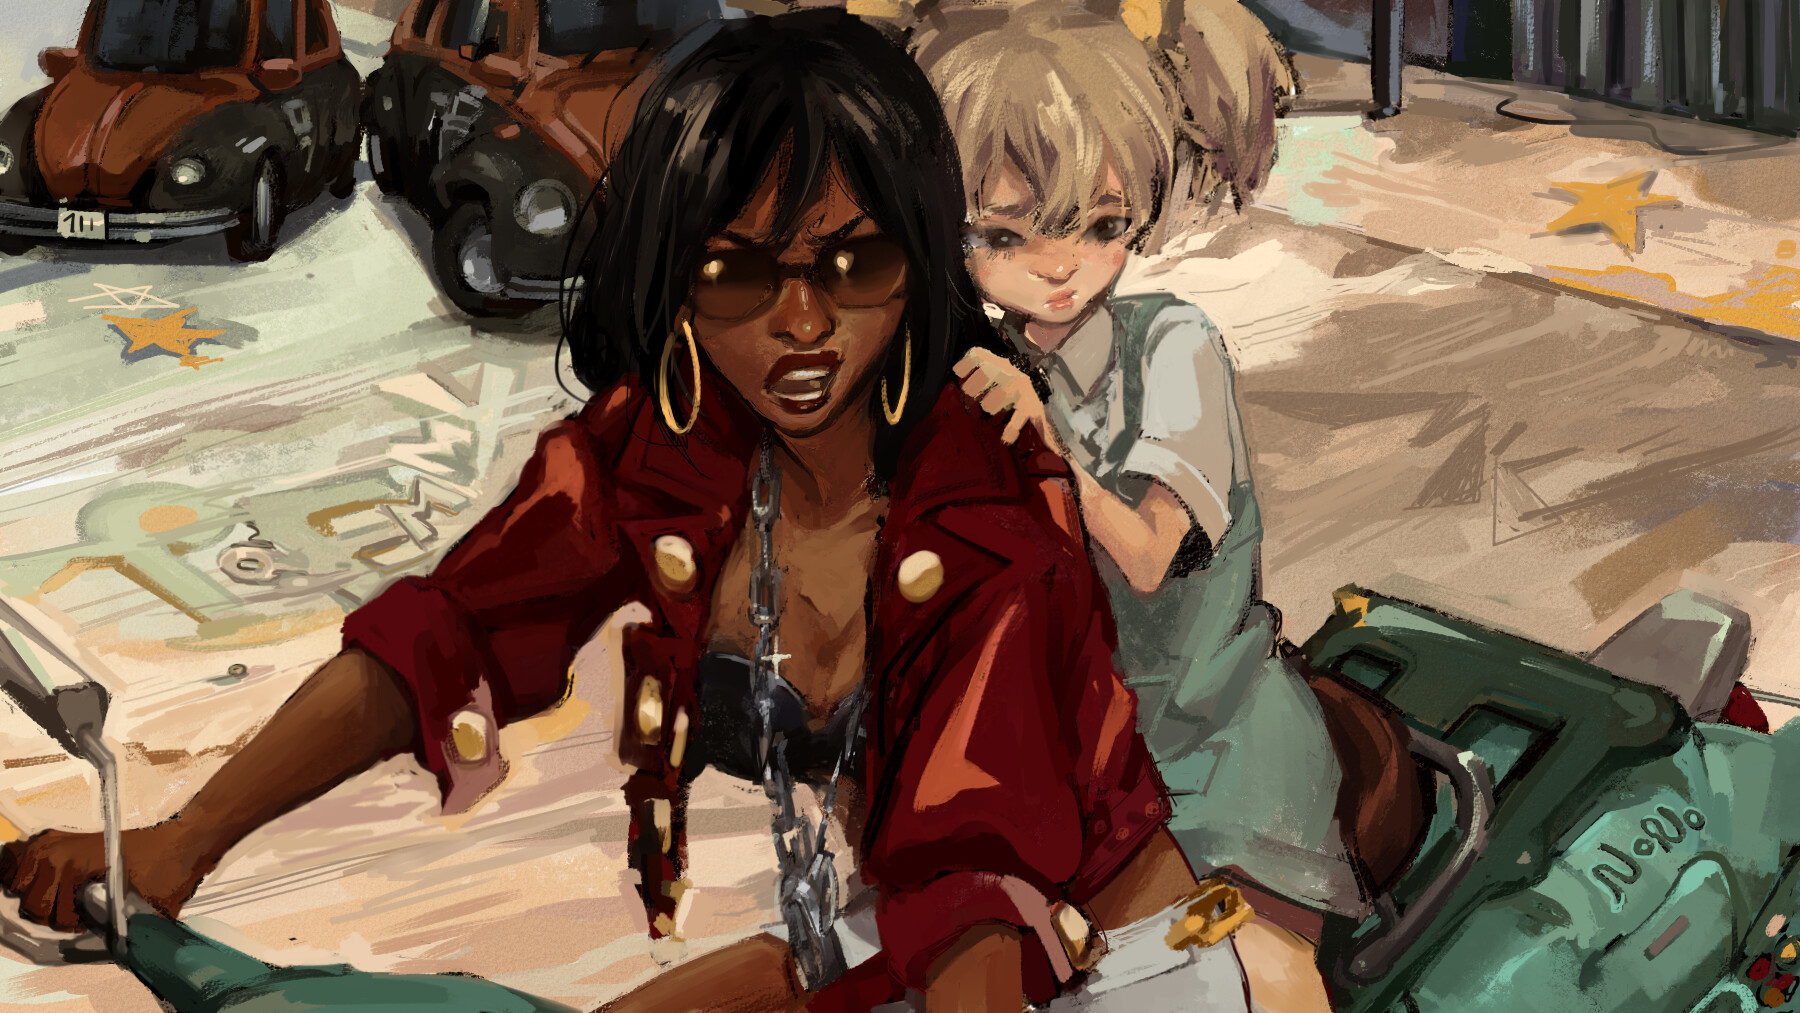 screencap redraw from the anime michiko and hatchin! 